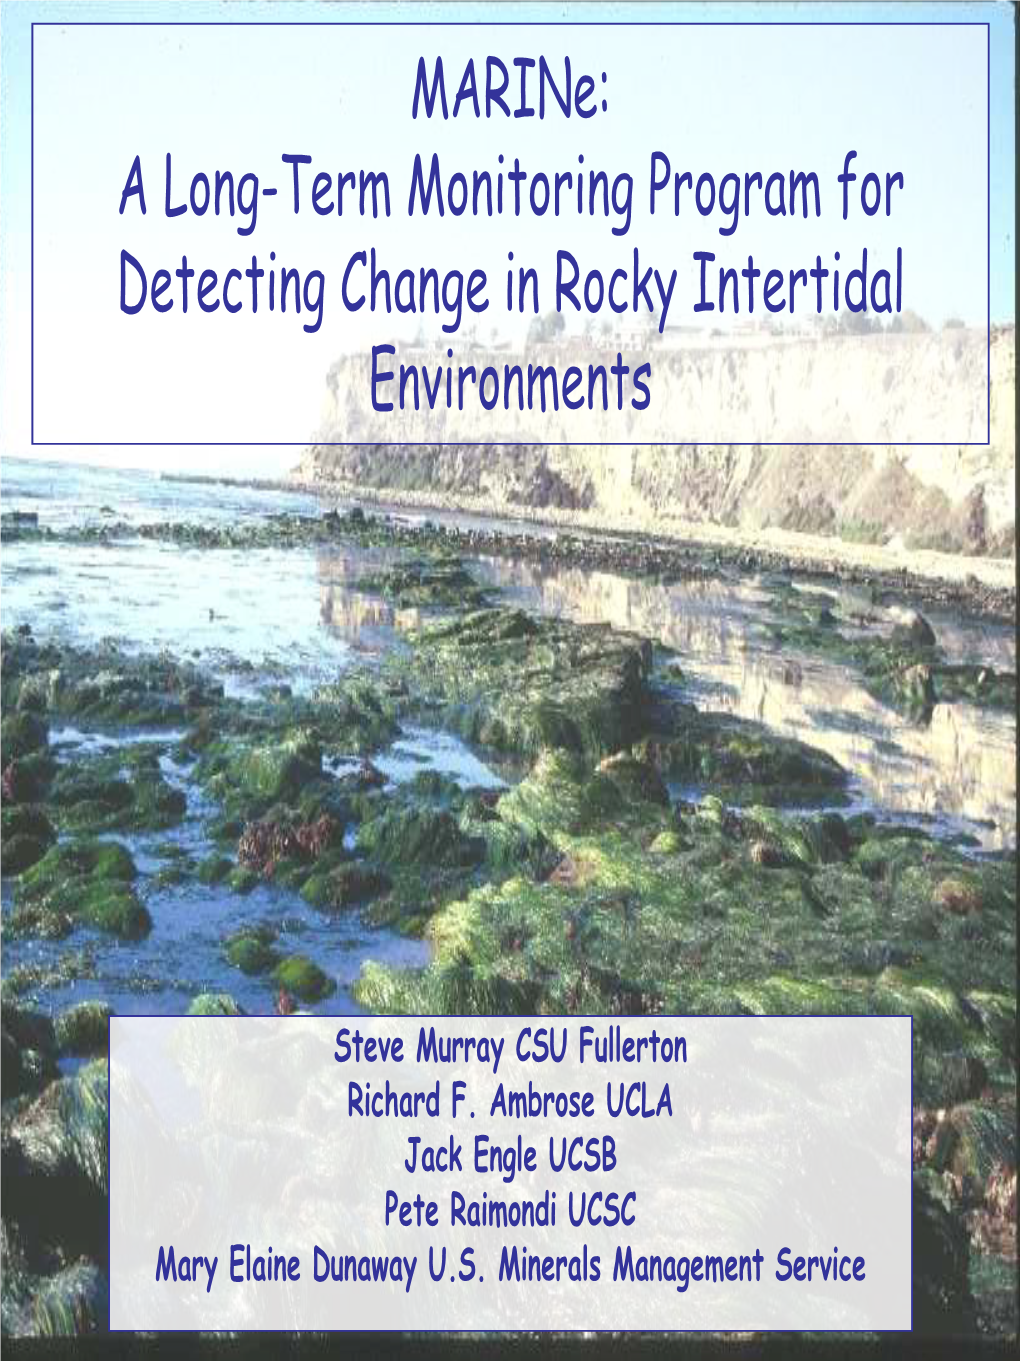 Marine: a Long-Term Monitoring Program for Detecting Change in Rocky Intertidal Environments